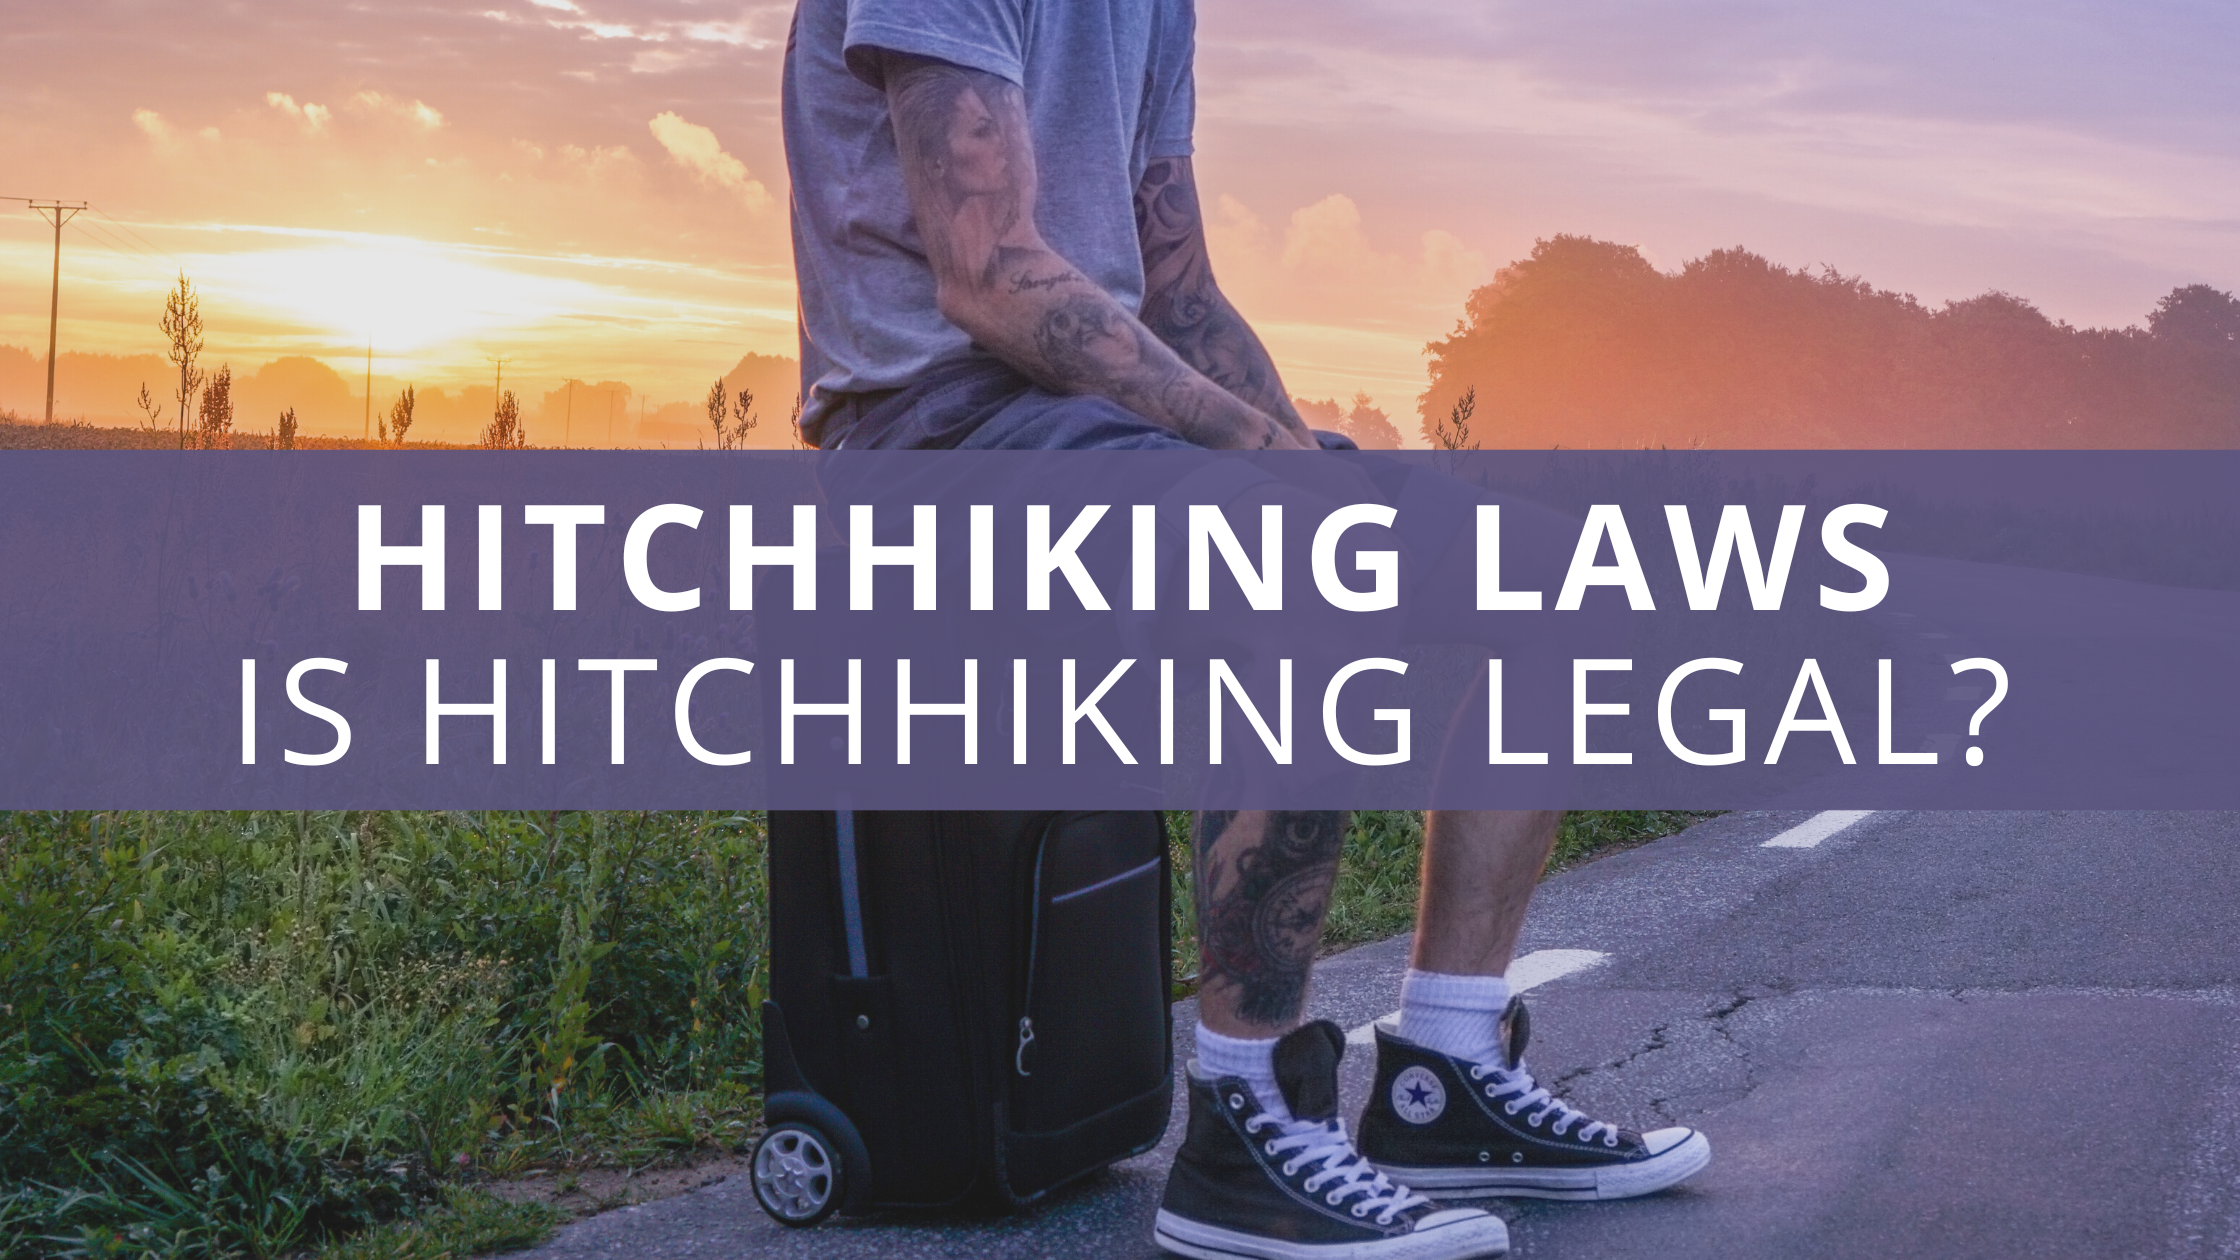 Hitchhiking Laws - Is Hitchhiking Legal?